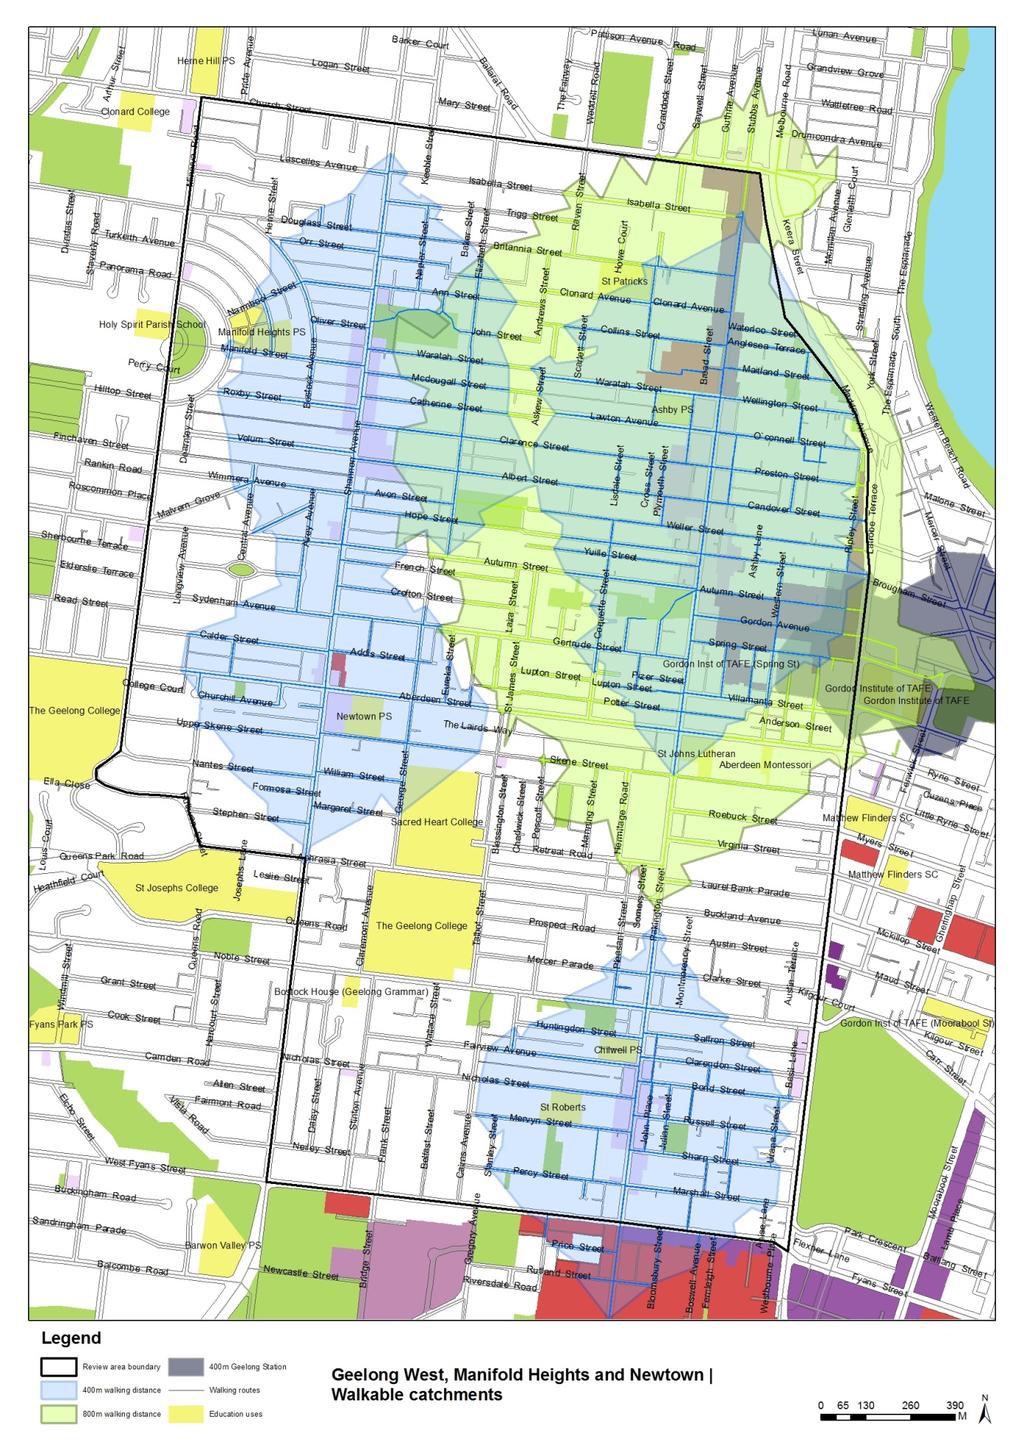 Reformed Residential Zones Implementation Report